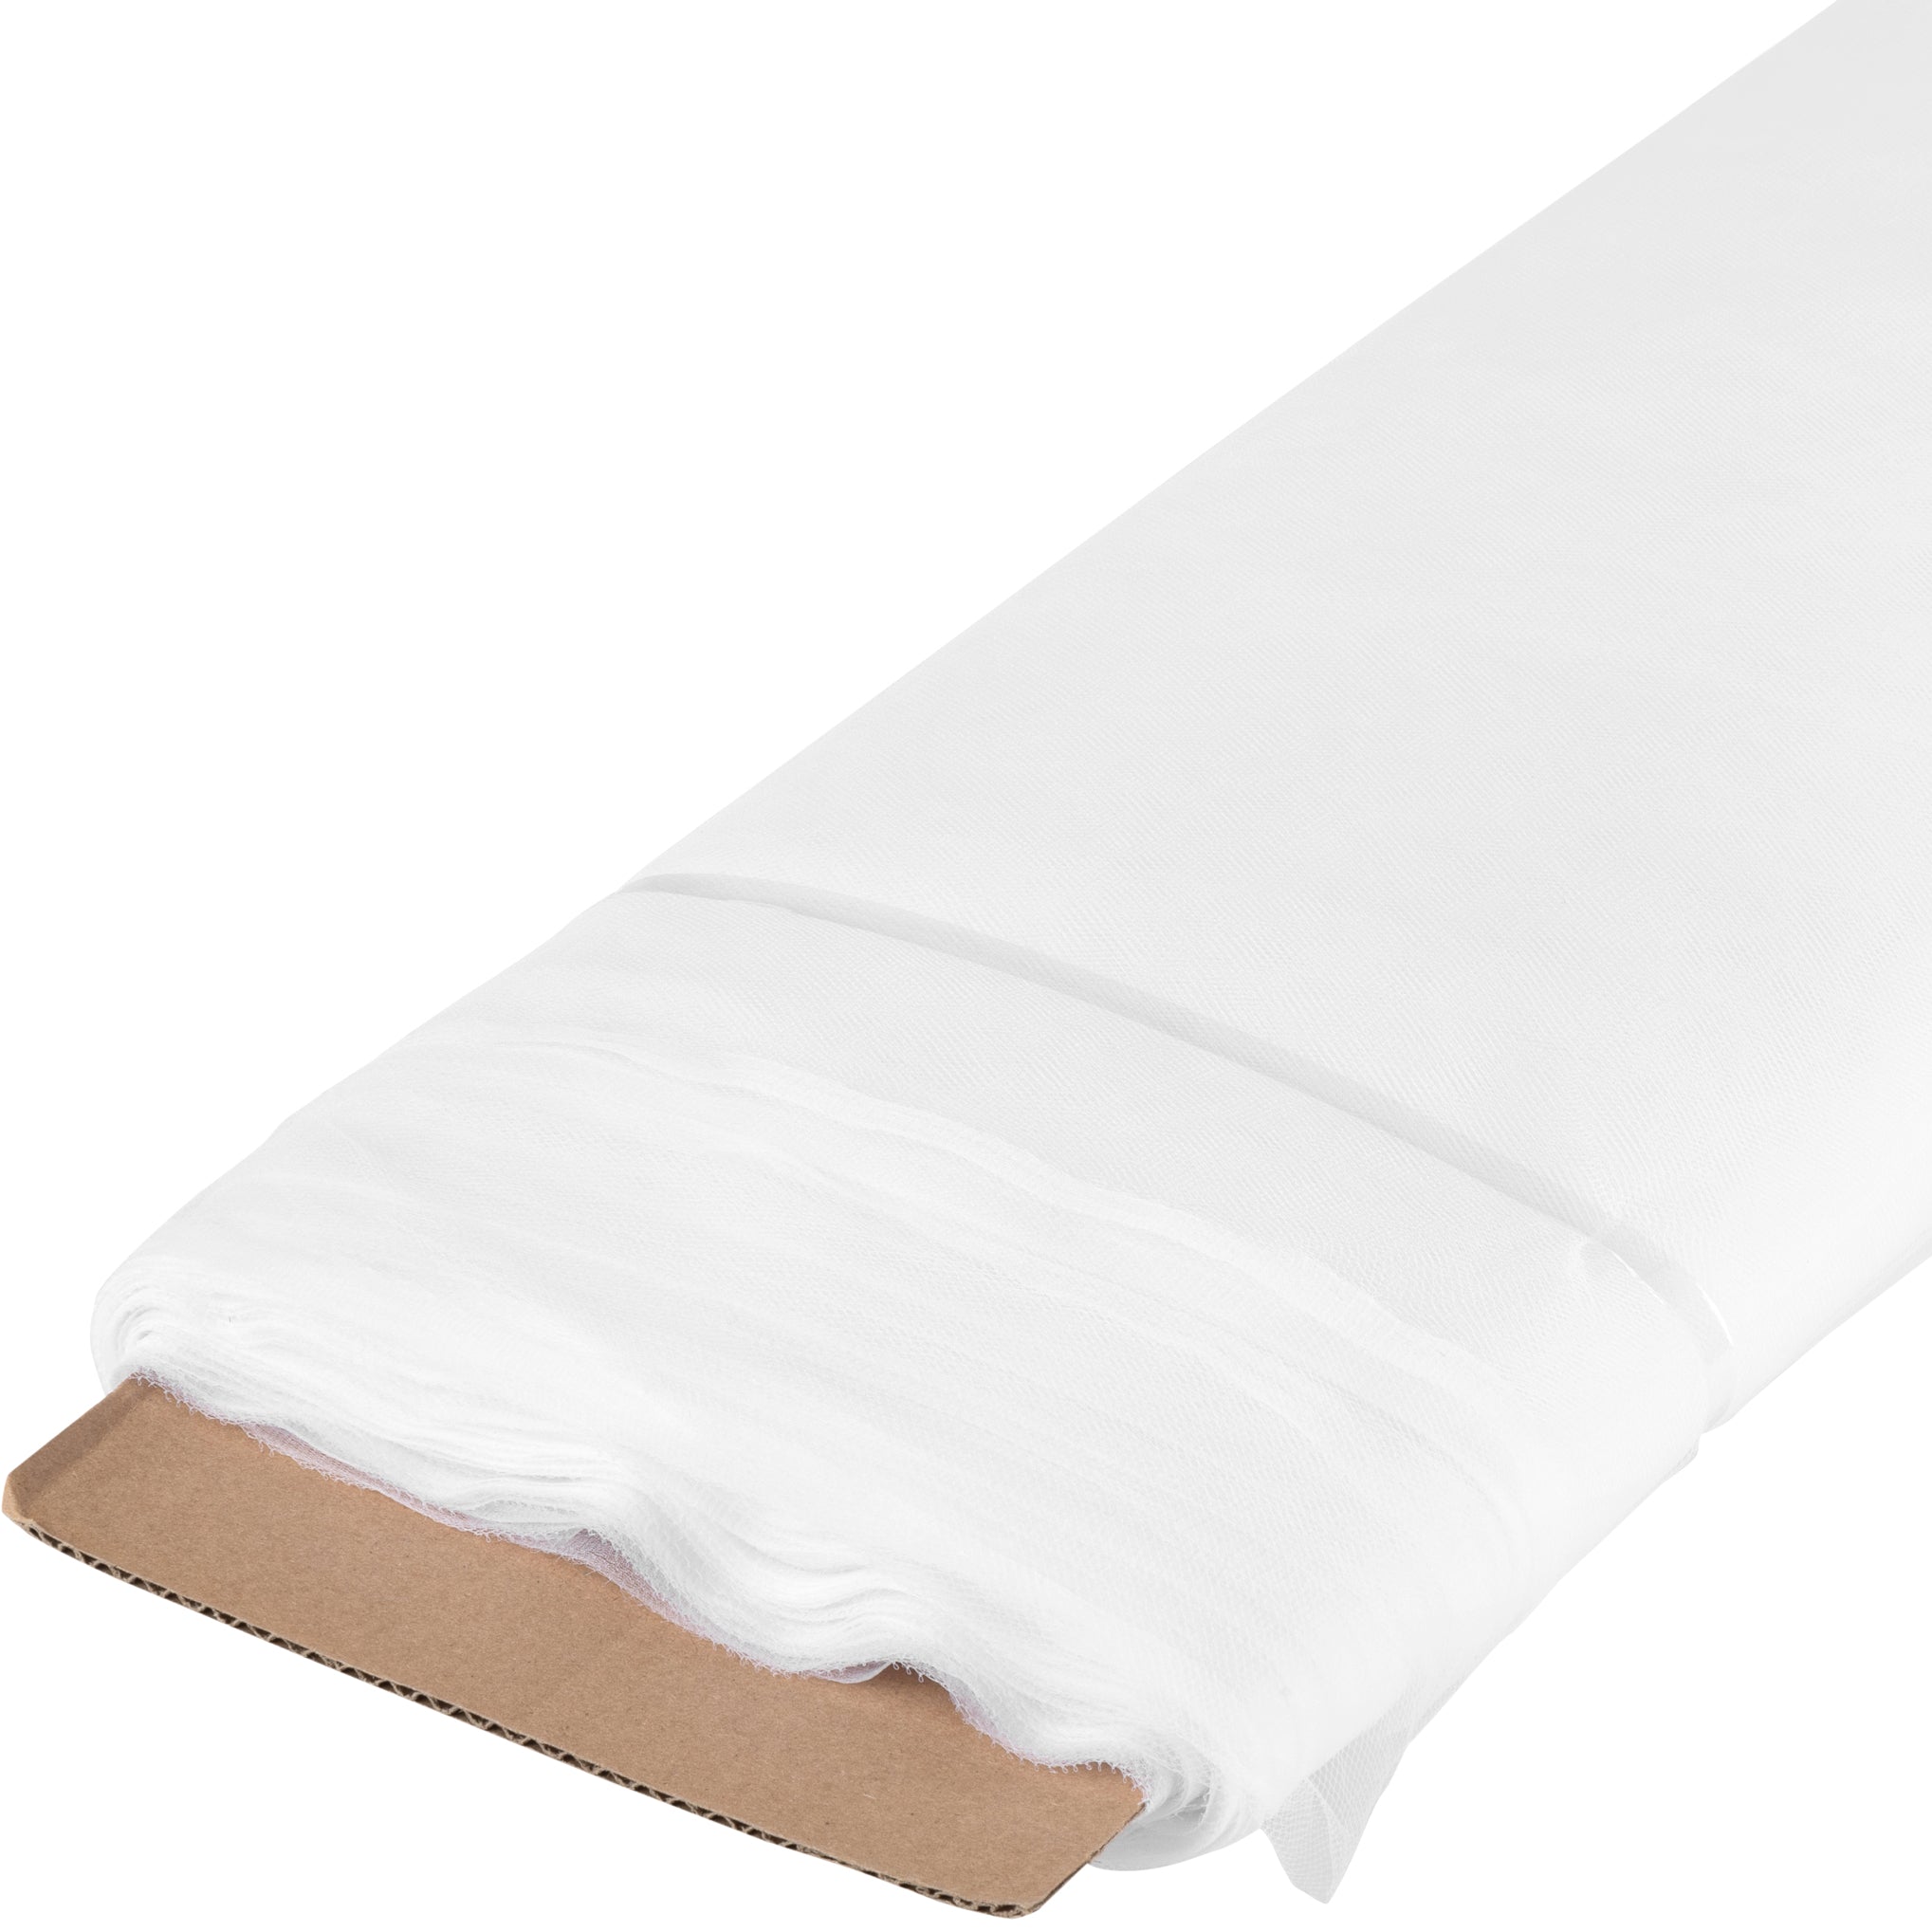 CV Linens Soft Tulle Fabric Roll 54 x 40 yds - White